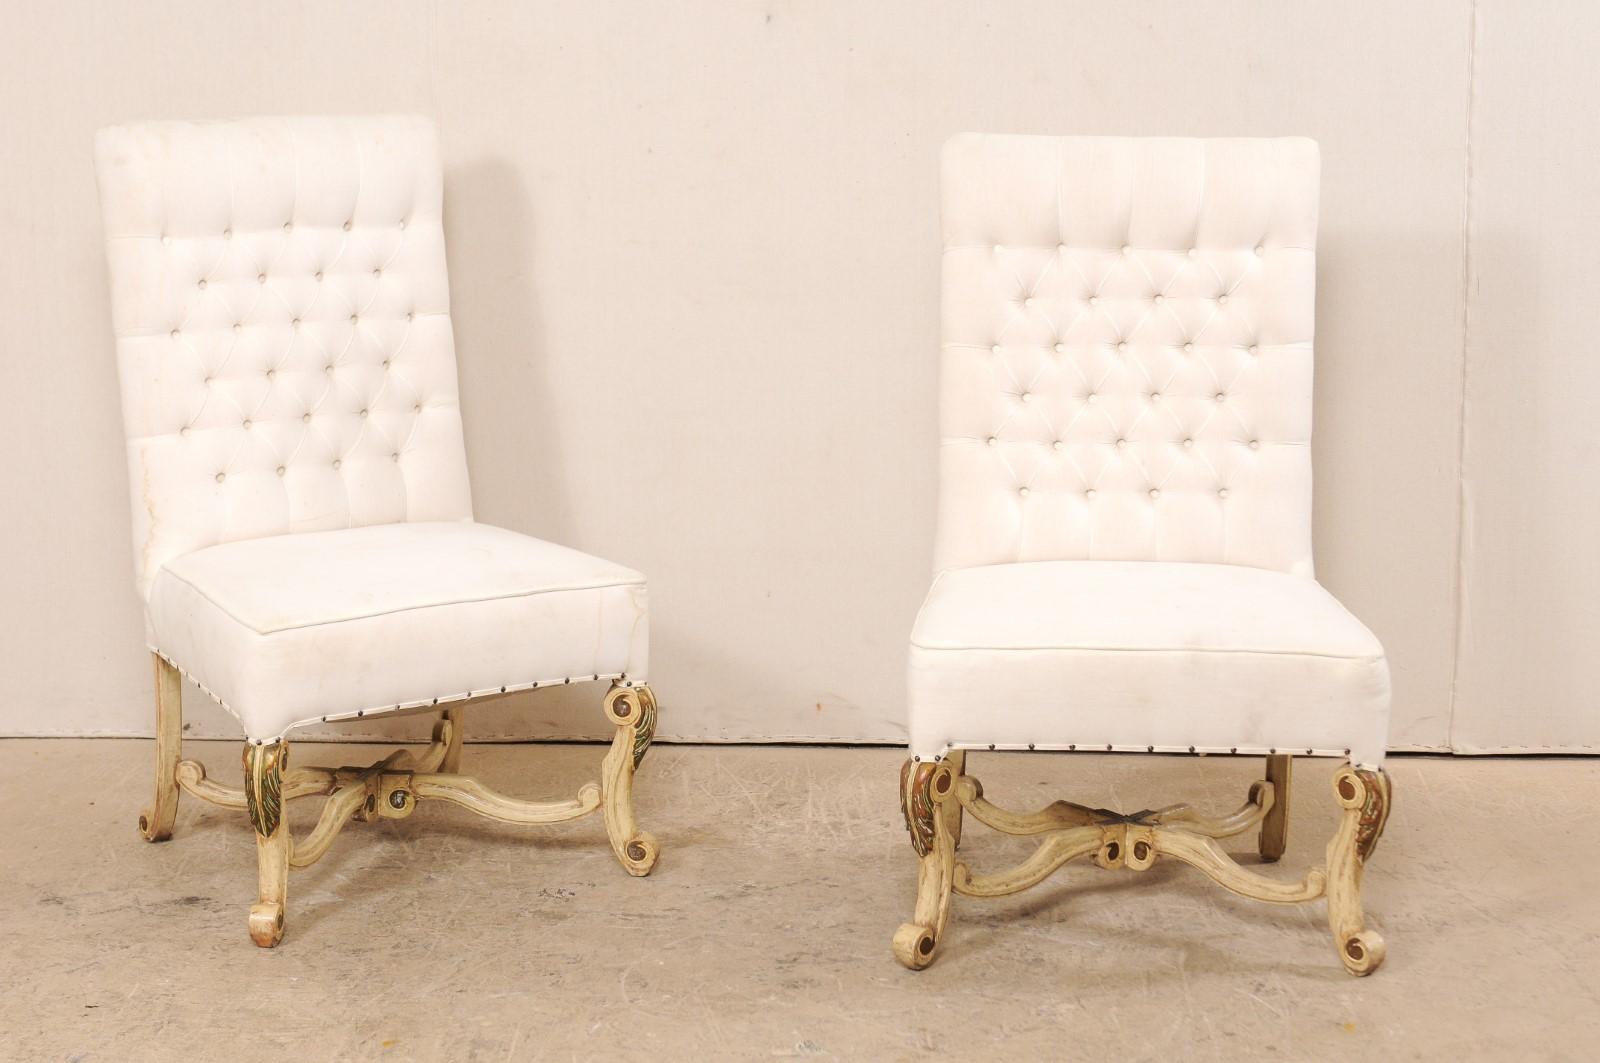 A pair of vintage American upholstered chairs with nicely carved legs and stretcher. This pair of good-sized, arm-less side chairs have an Italian inspired design, with each featuring upholstered seat and tufted backs, raised upon beautifully carved